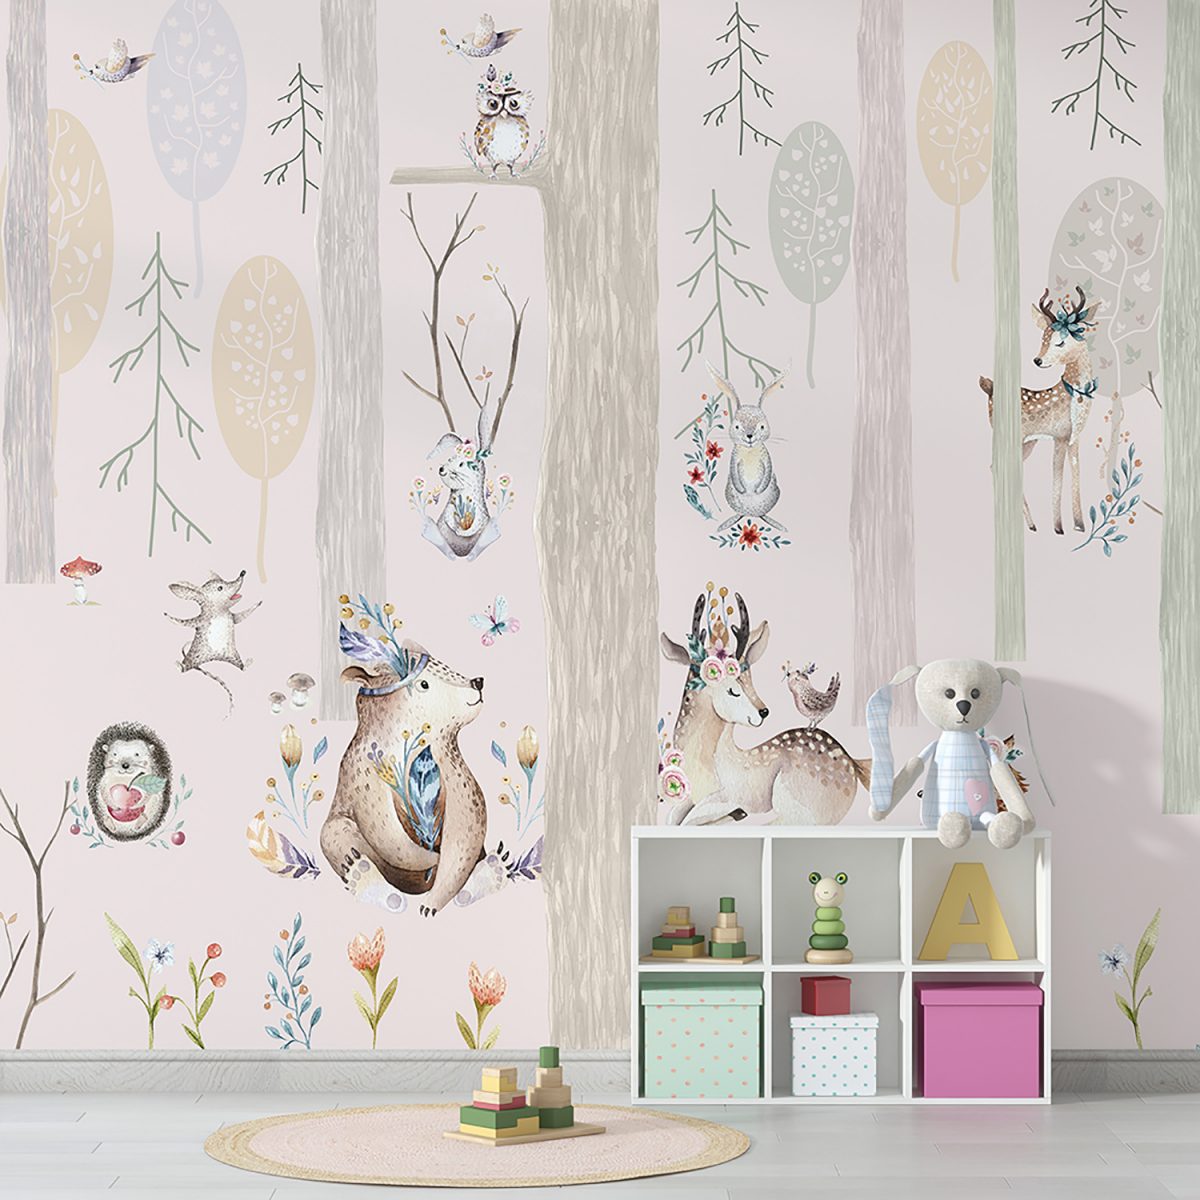 Other Worldly Forest Wallpaper Mural